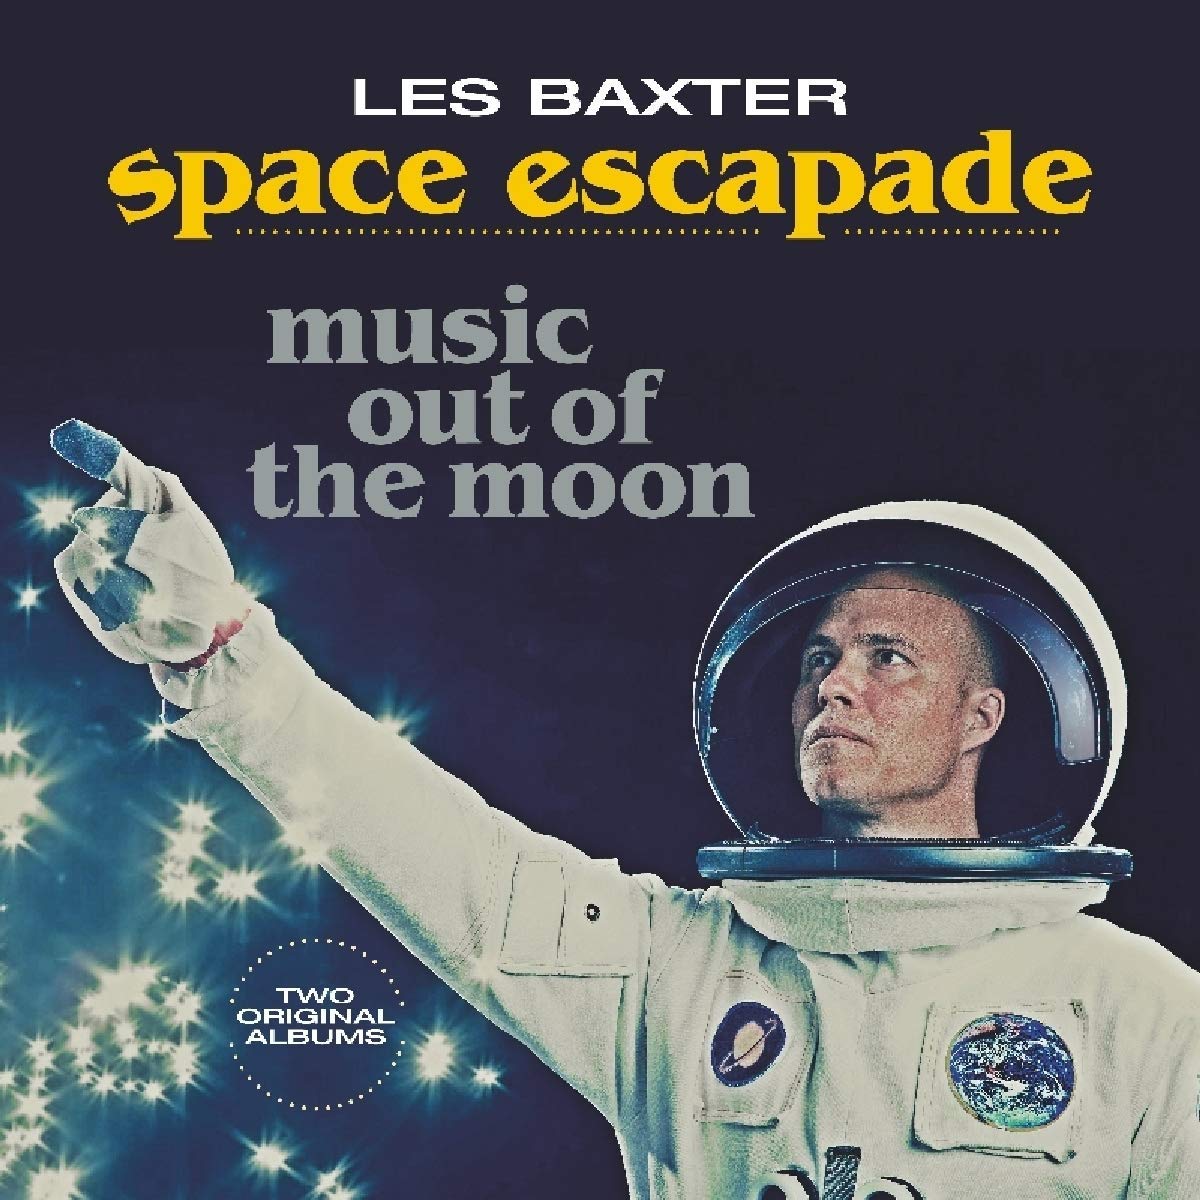 LES BAXTER / レス・バクスター / SPACE ESCAPADE / MUSIC OUT OF THE MOON (2ON1LP)